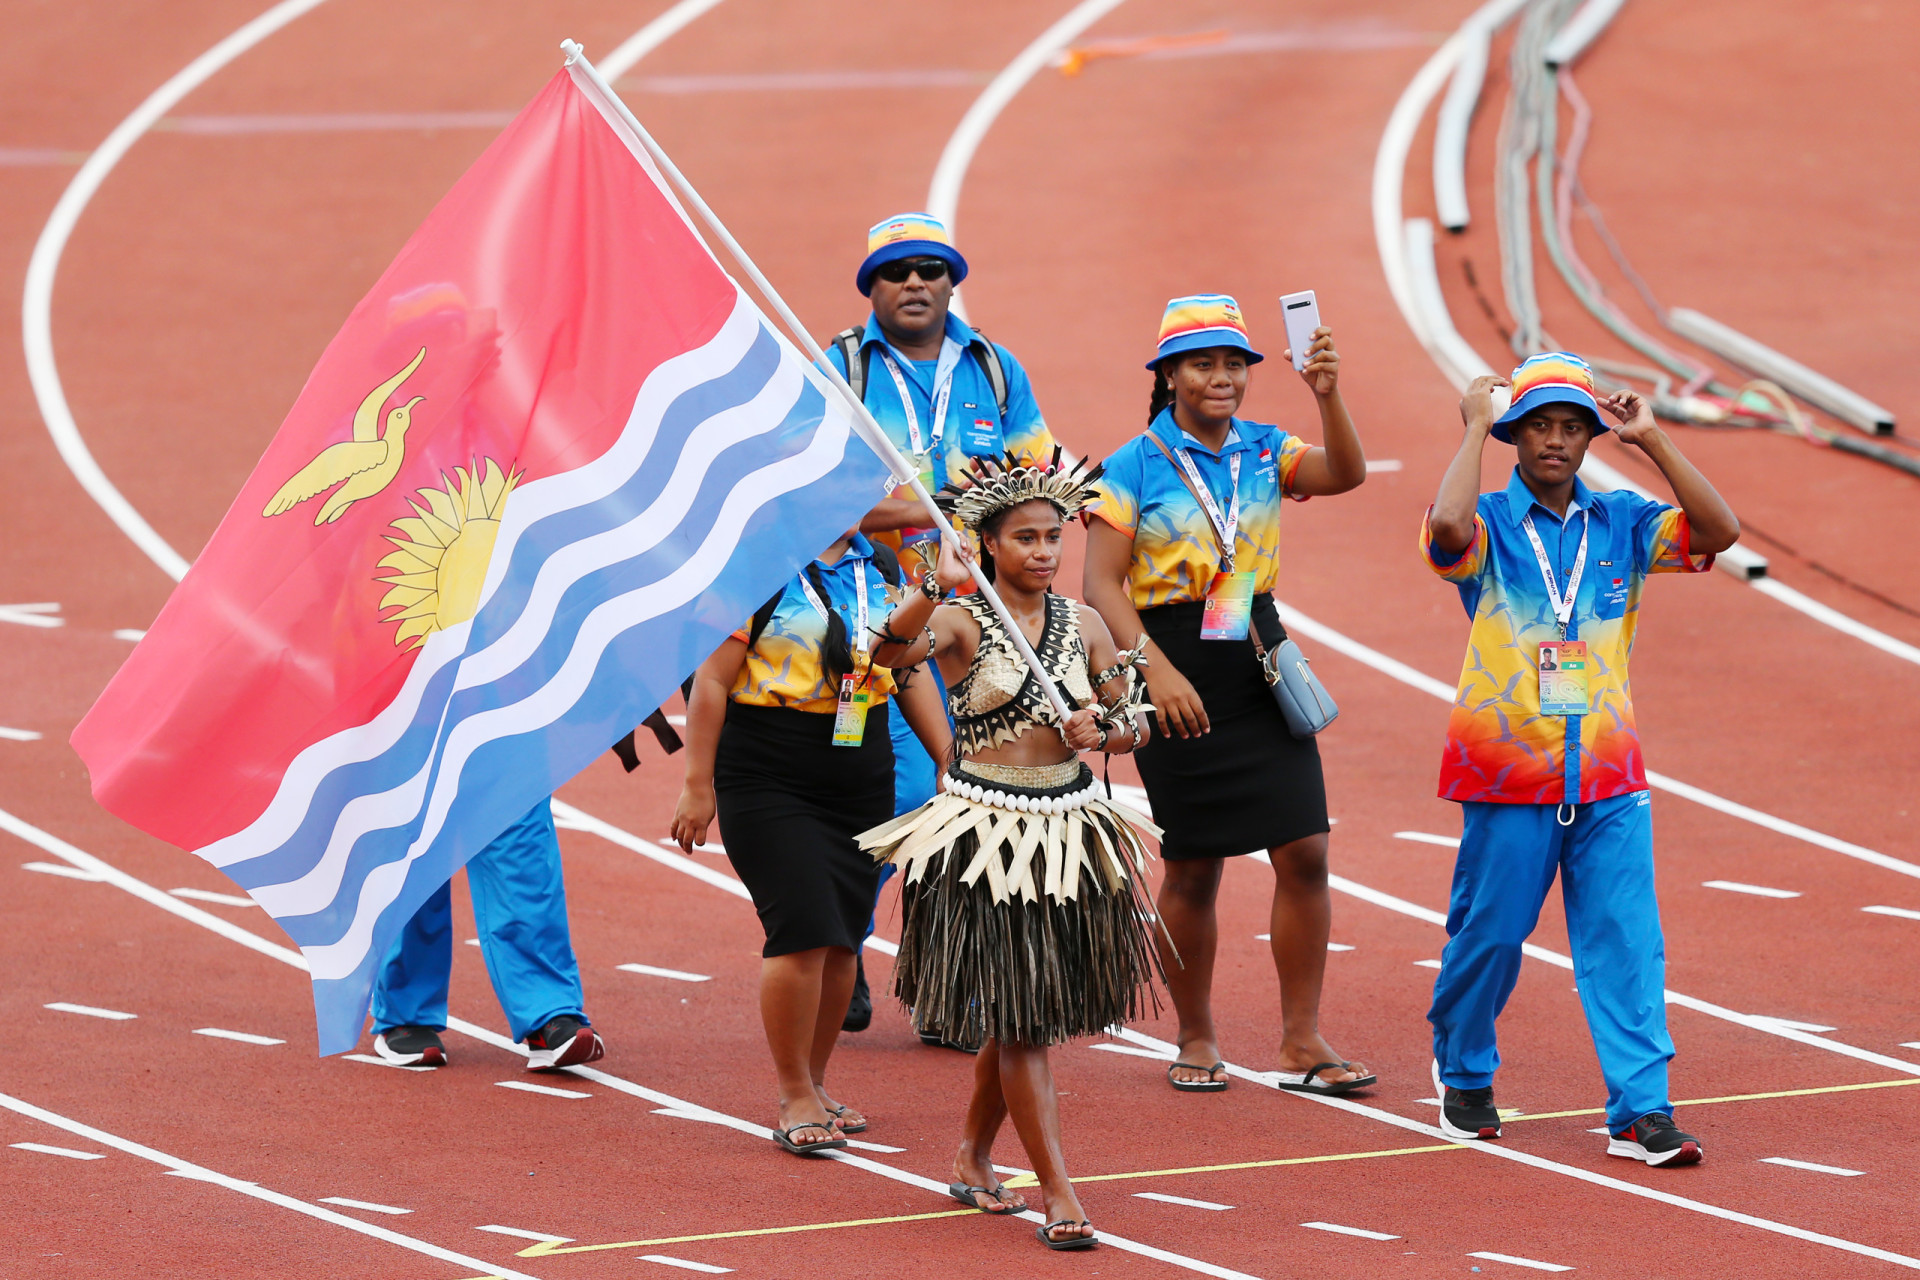 <p>Kiribati athletes participate in regional and international competitions, including the Pacific Games and the Olympics, with traditional sports like canoe racing also being popular locally. The most popular sport is soccer, and the country even has its own stadium that can hold 2,500 people.</p><p><a href="https://www.msn.com/en-us/community/channel/vid-7xx8mnucu55yw63we9va2gwr7uihbxwc68fxqp25x6tg4ftibpra?cvid=94631541bc0f4f89bfd59158d696ad7e">Follow us and access great exclusive content every day</a></p>